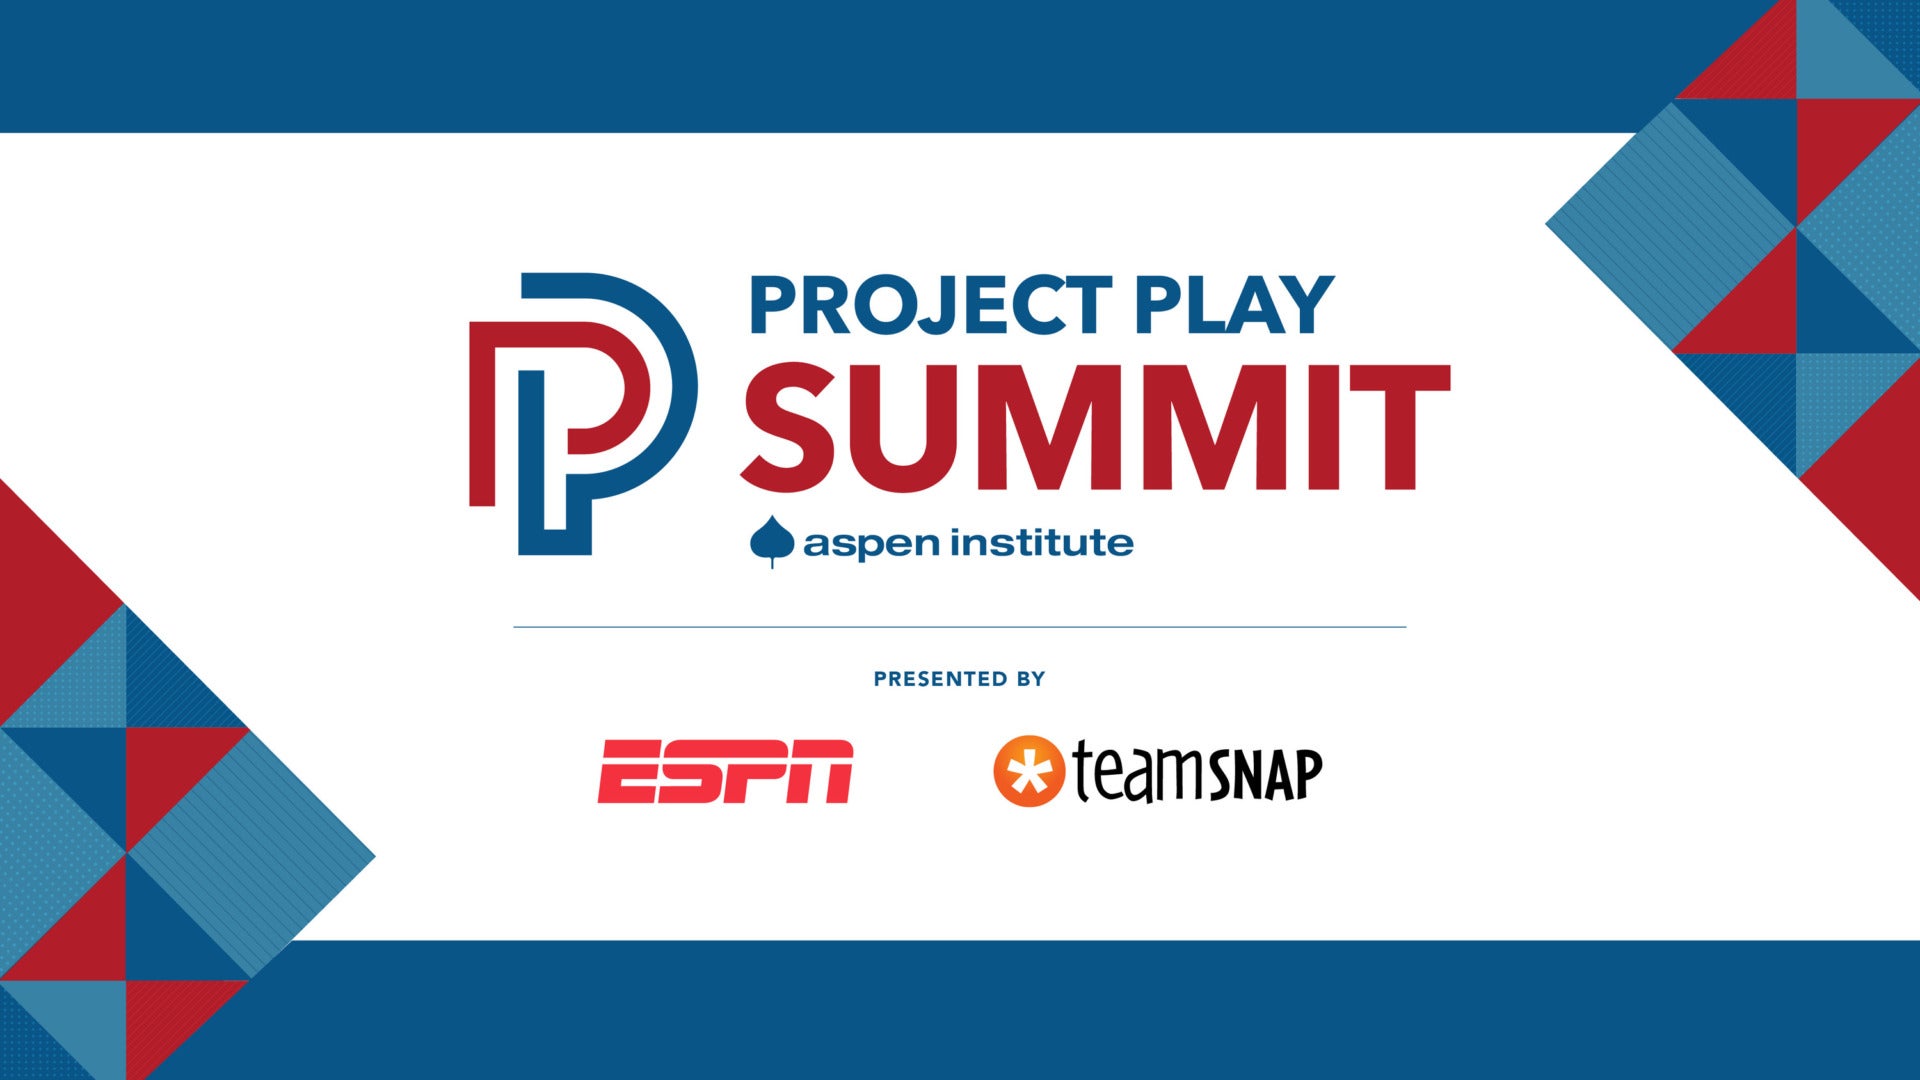 Project Play Summit 2021